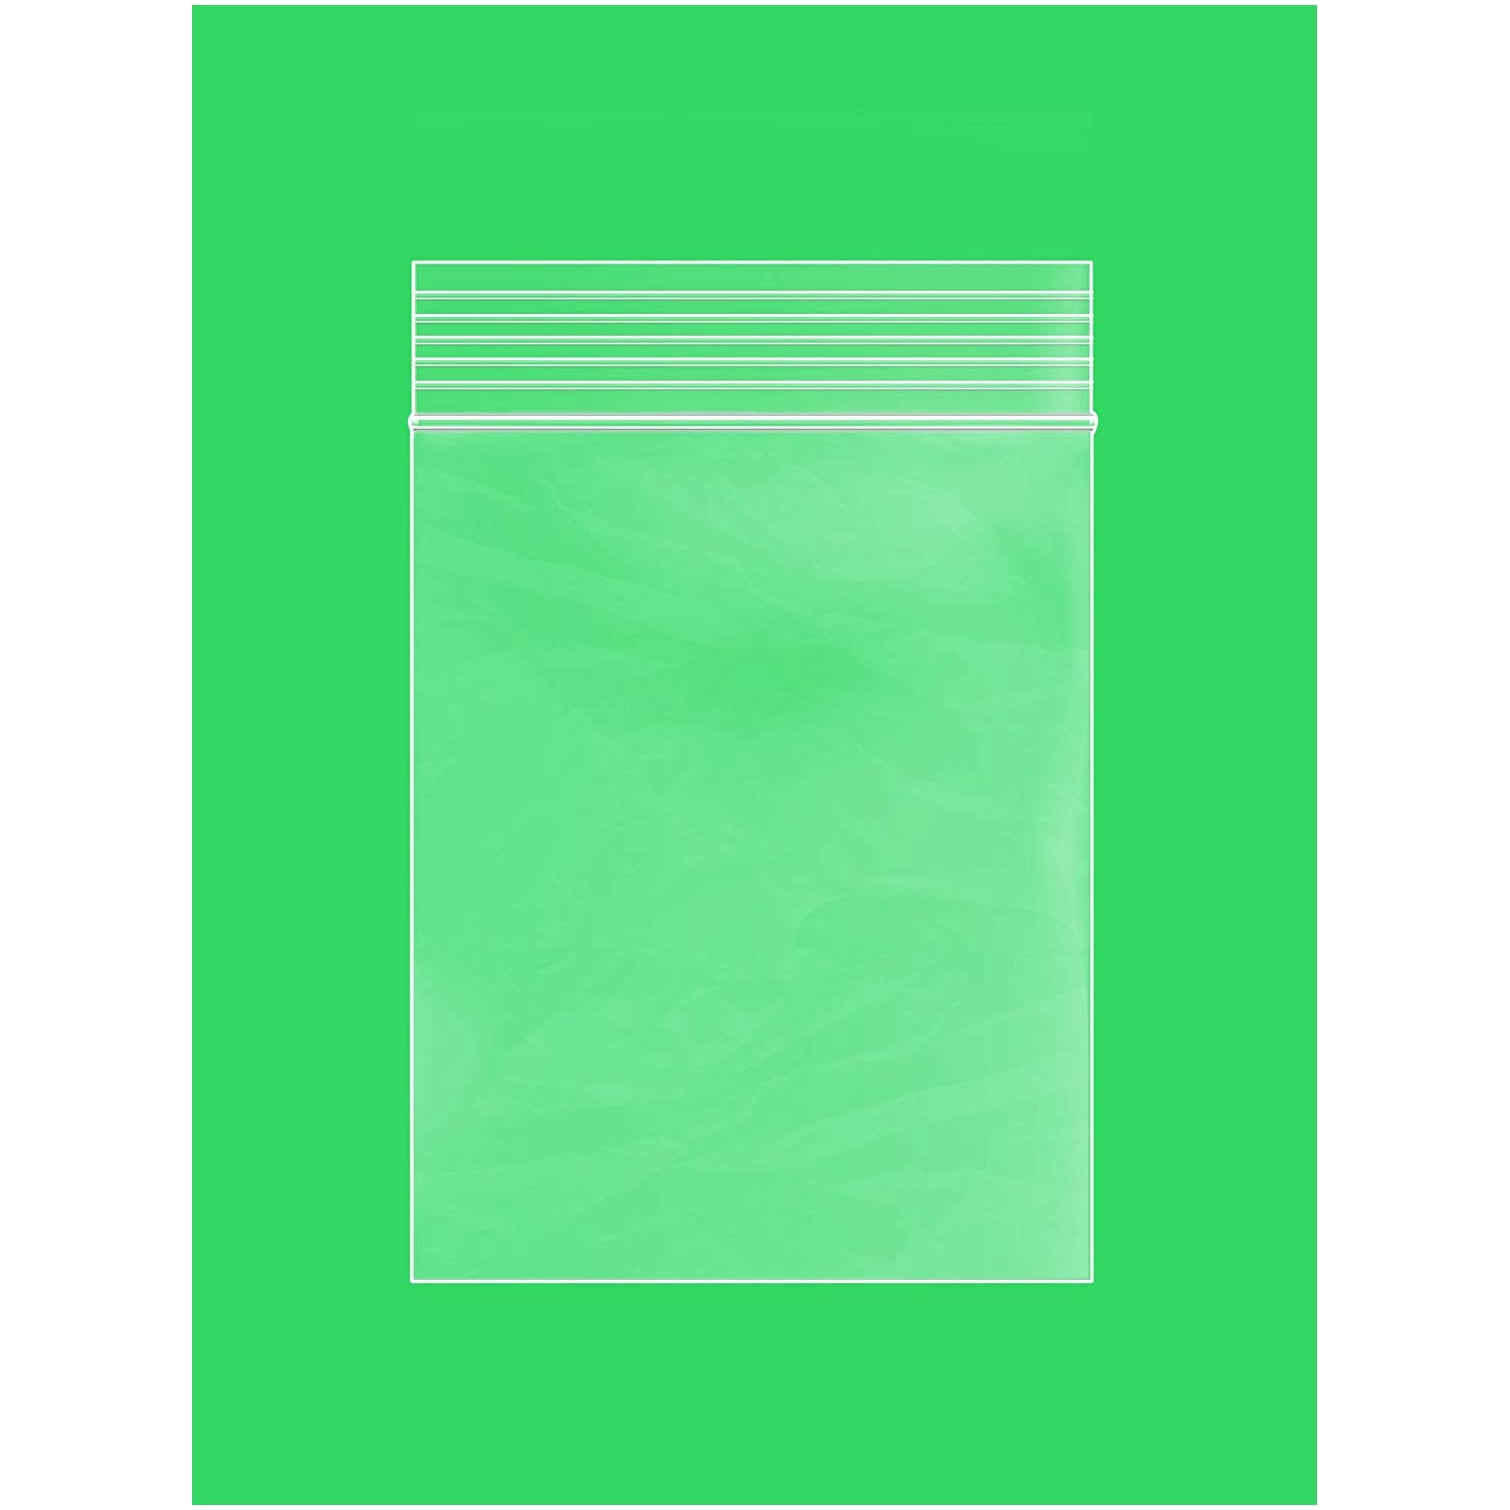 Details about   100 GUMMY BAGS HEAVY DUTY SMALL TINY SEALY GRIP ZIP LOCK SEAL LARGE BAGGIES 1000 